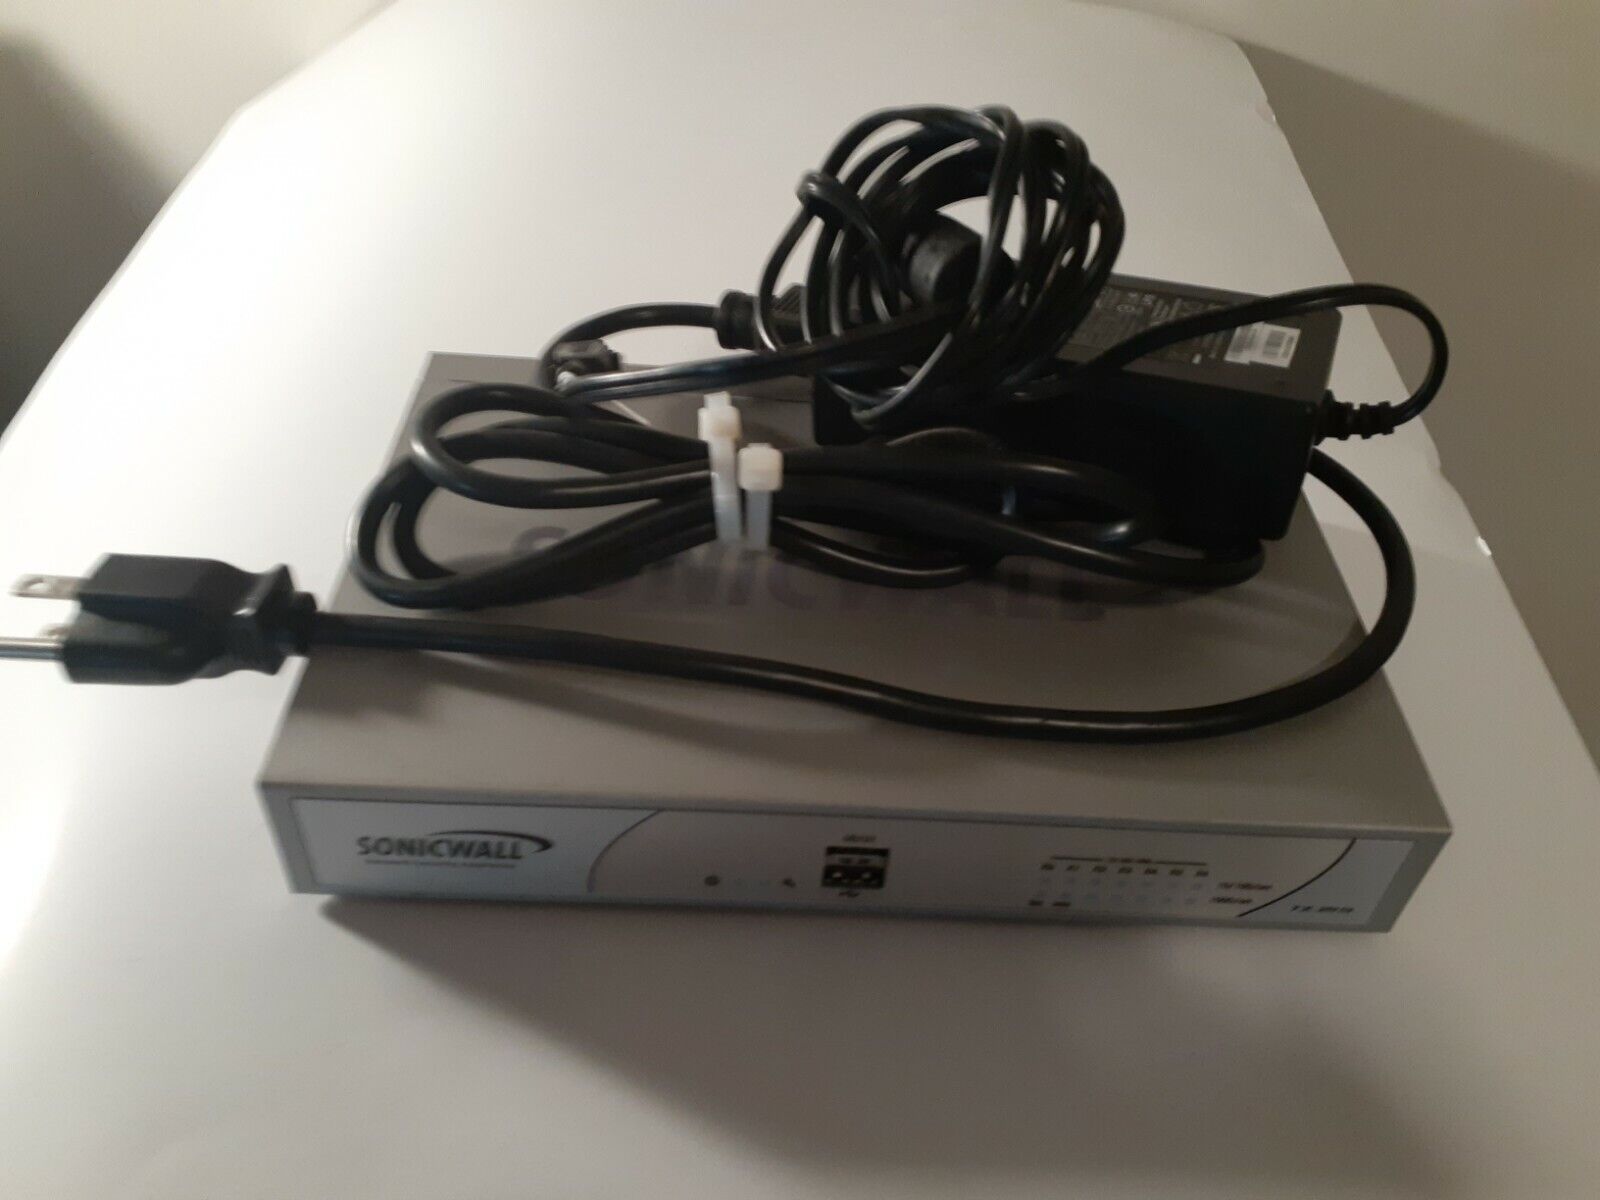 SONICWALL TZ215 Firewall, Used, Factory Reset, Latest Firmware, Tested